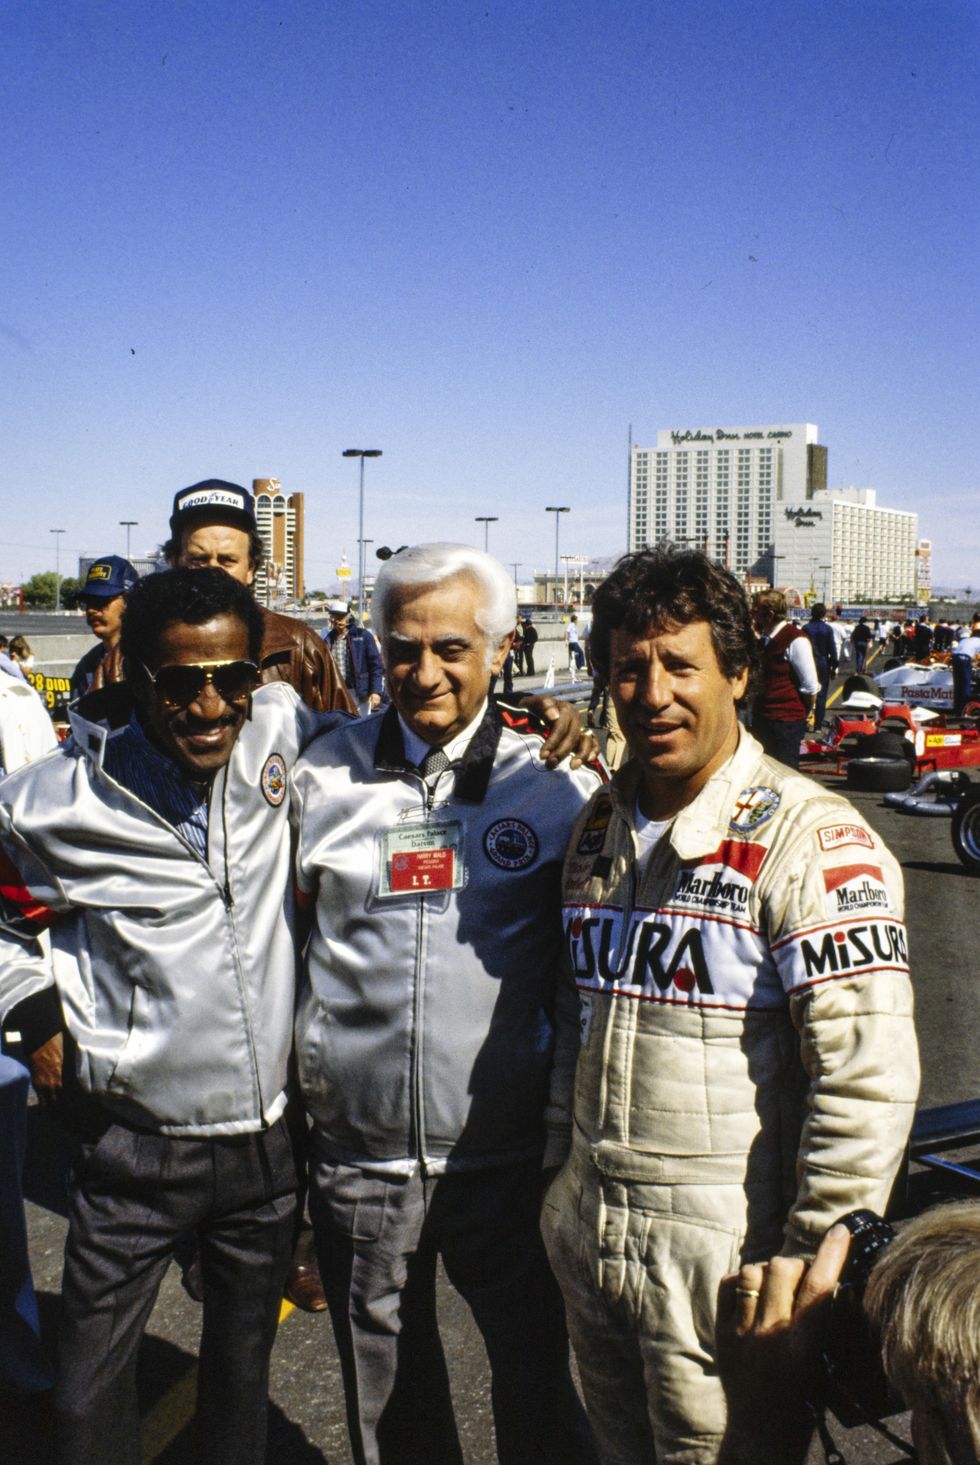 streets of las vegas, united states of america october 17 mario andretti with sammy davis jr and caesars palace president harry wald during the caesars palace gp at streets of las vegas on october 17, 1981 in streets of las vegas, united states of america photo by ercole colombo studio colombo